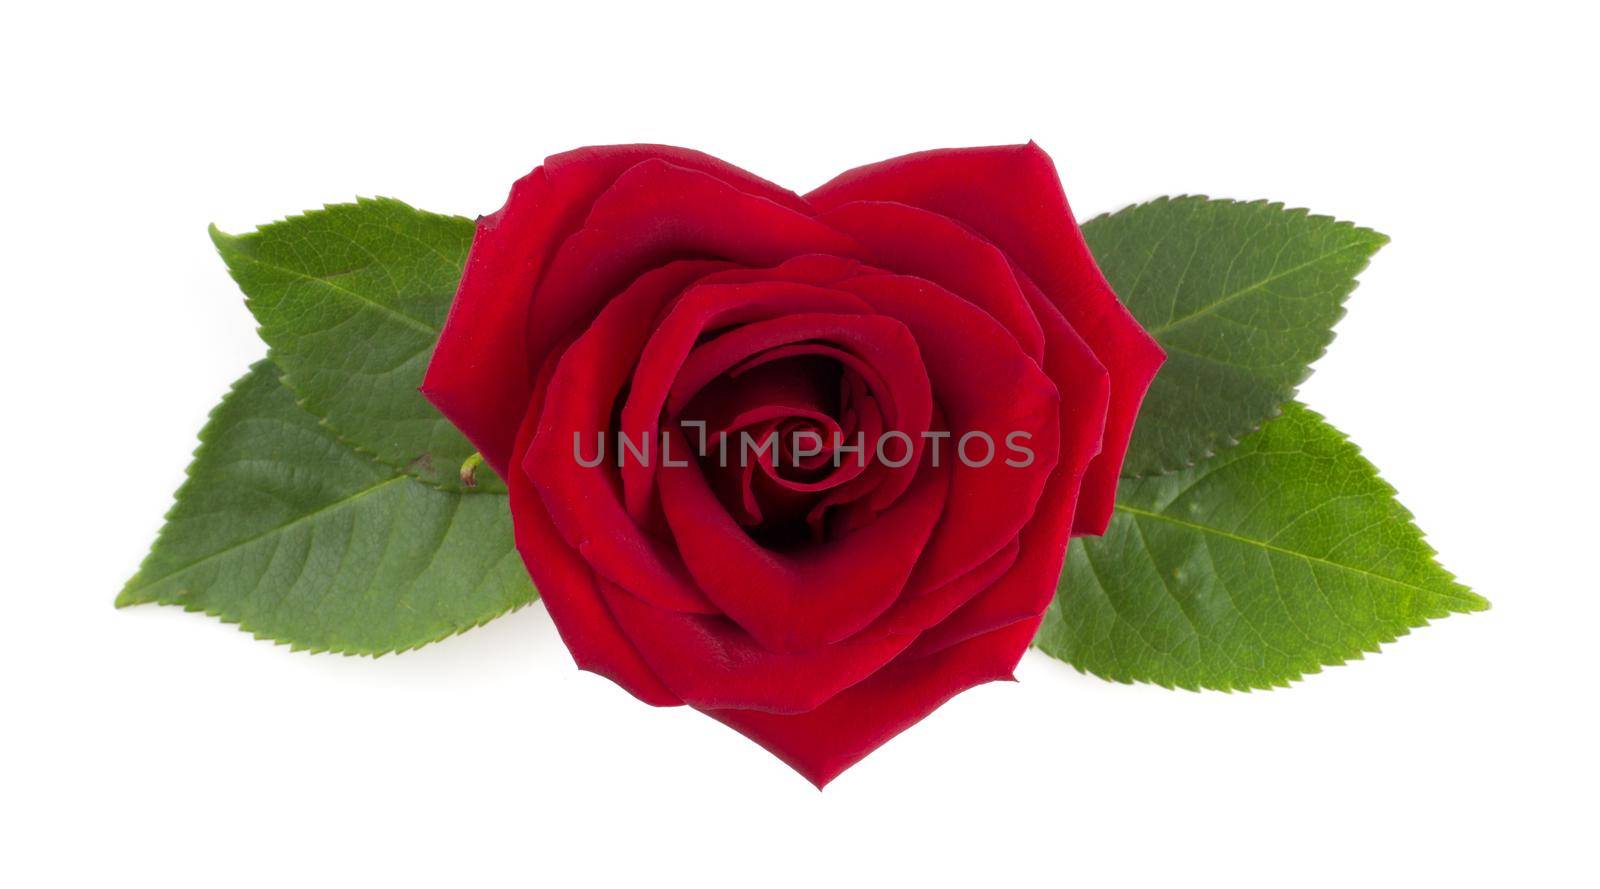 Heart shaped red rose flower and leaves arrangement isolated on white background, top view, design element for Valentines day